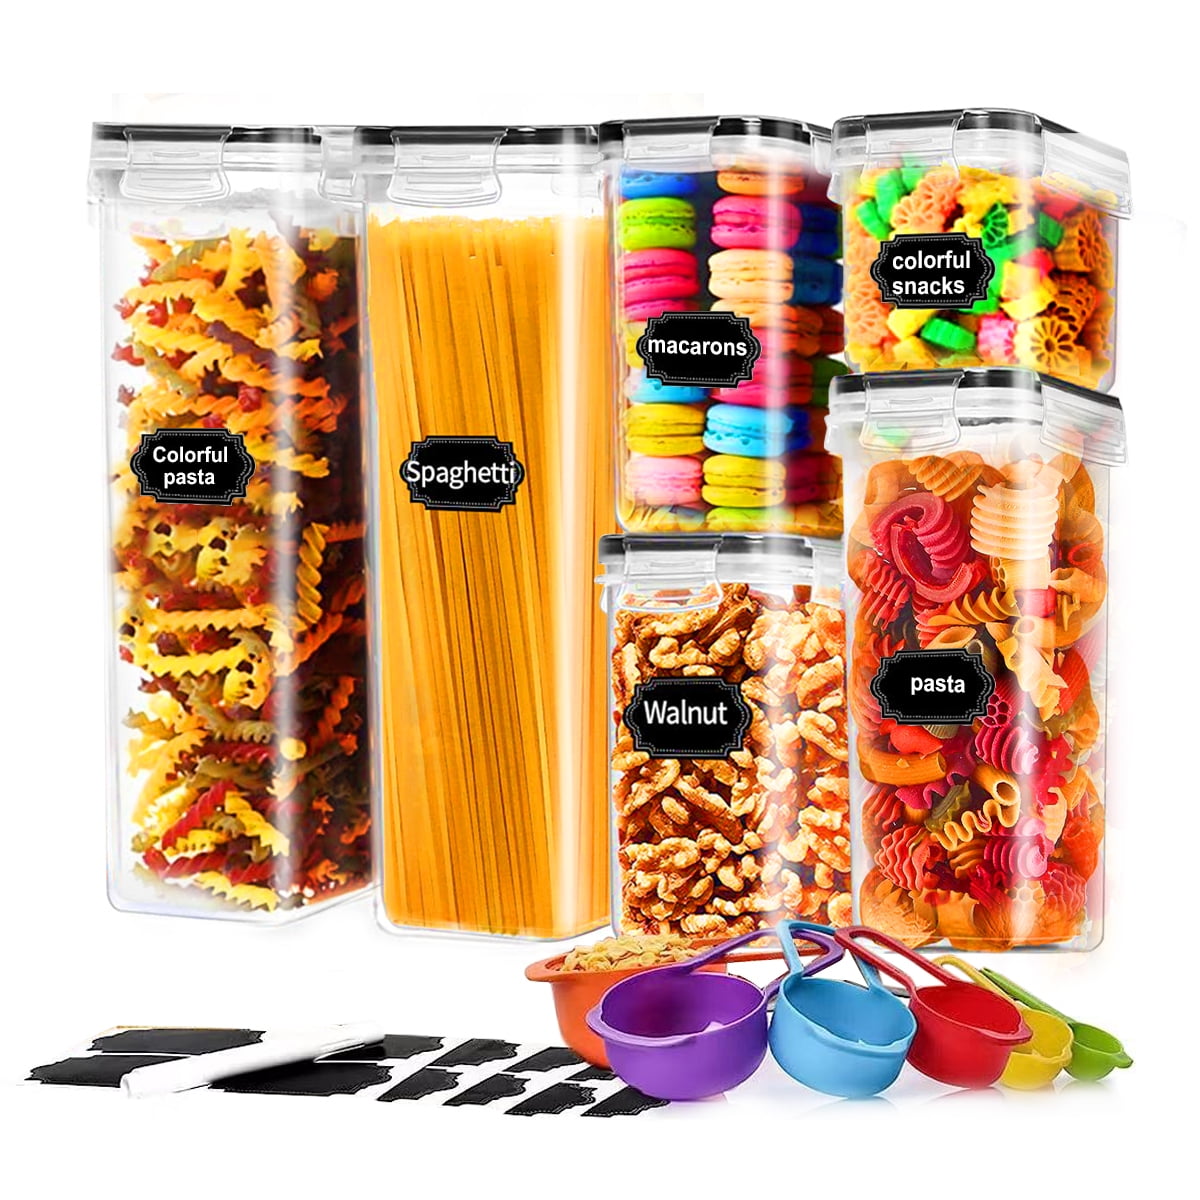 PRAKI Airtight Food Storage Containers Set with Lids - 24 PCS, BPA Free  Kitchen and Pantry Organization, Plastic Leak-proof Canisters for Cereal  Flour & Sugar - Labels & Marker